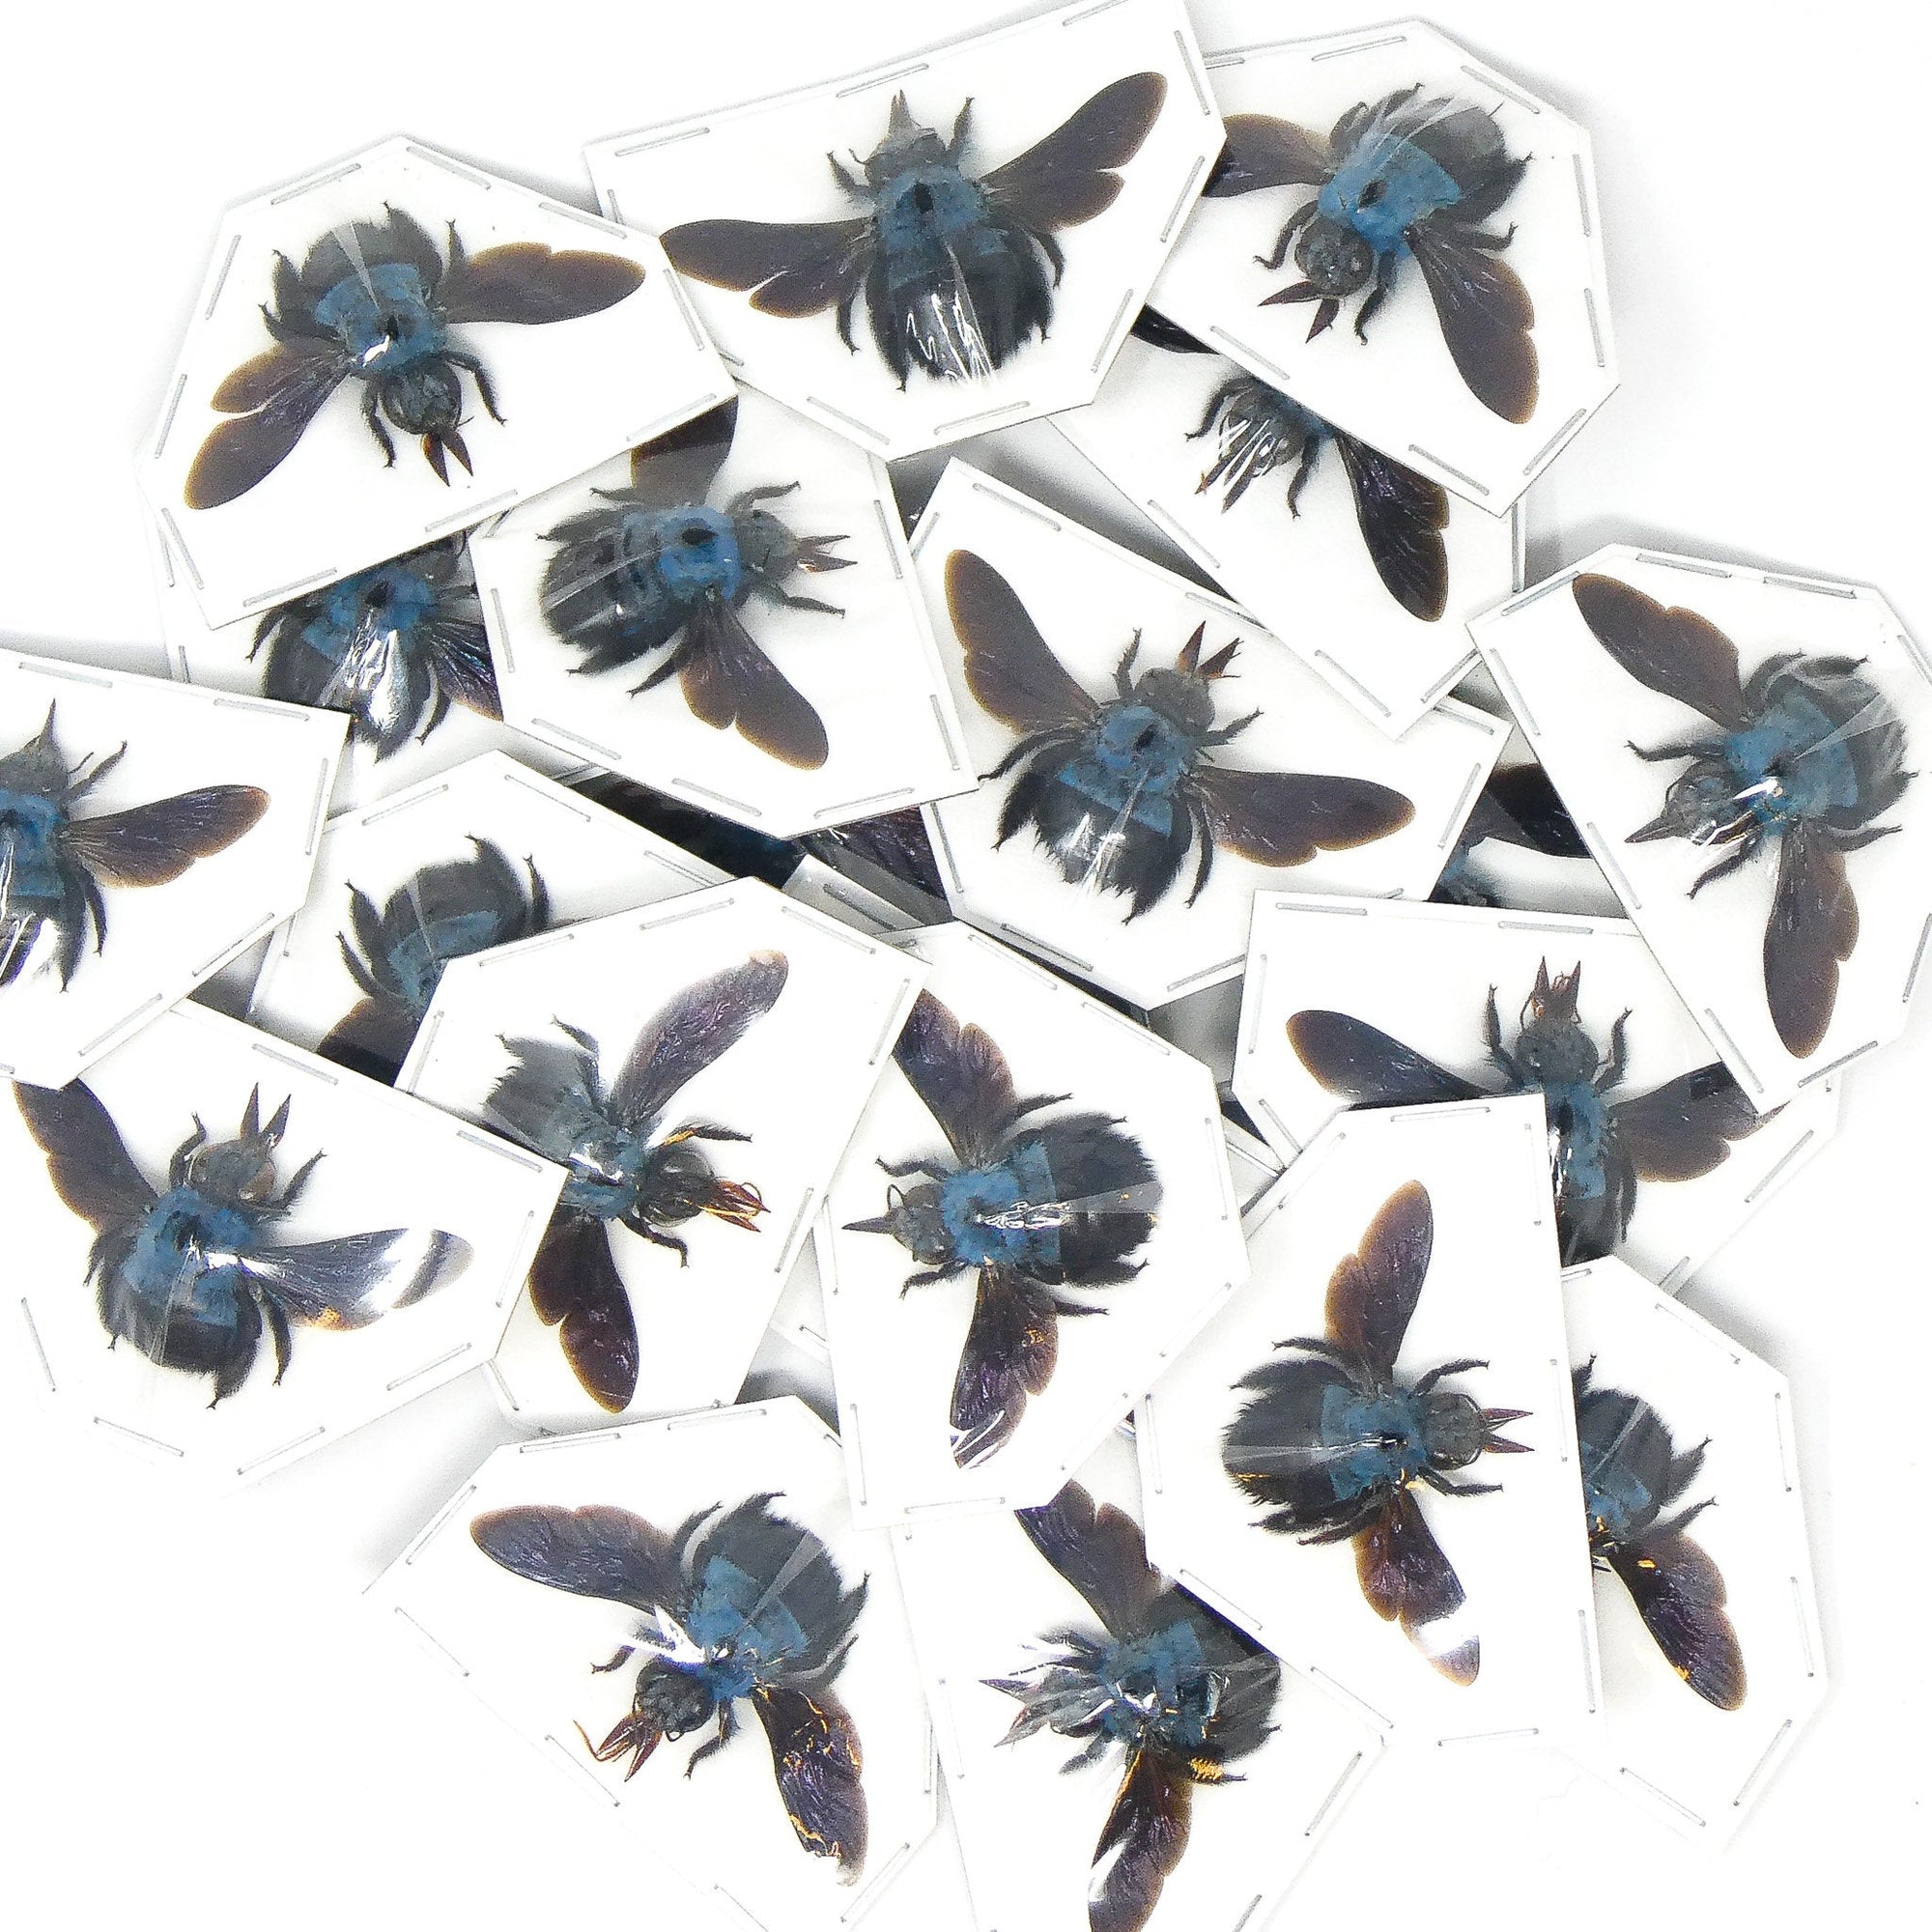 Pack of 25 Blue Carpenter Bees (Xylocopa caerulea) A1 Spread Specimens